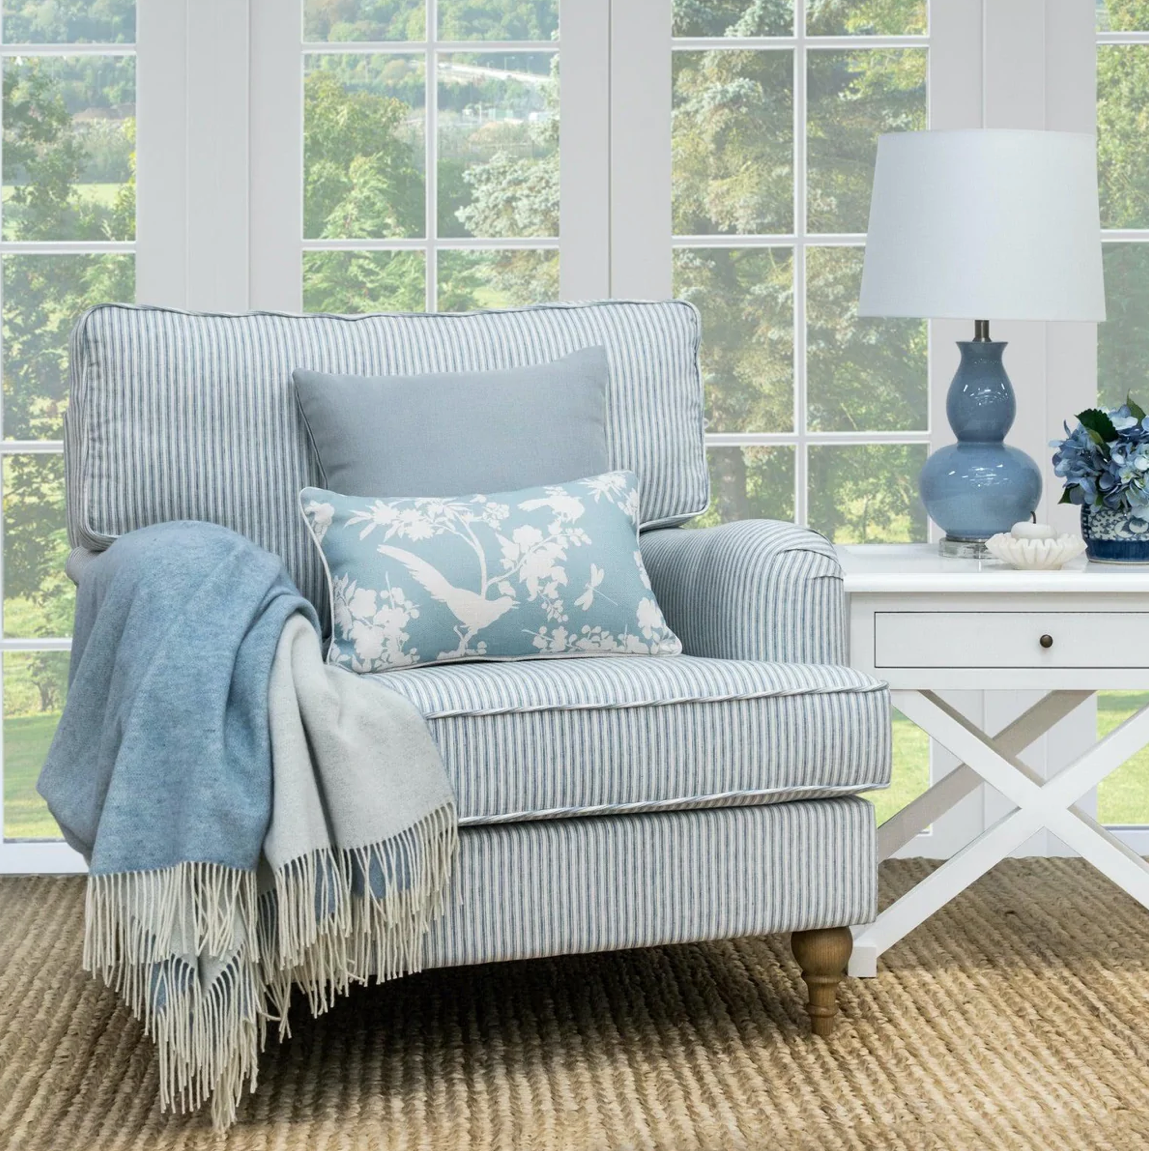 Choosing and incorporation armchairs into your hamptons home